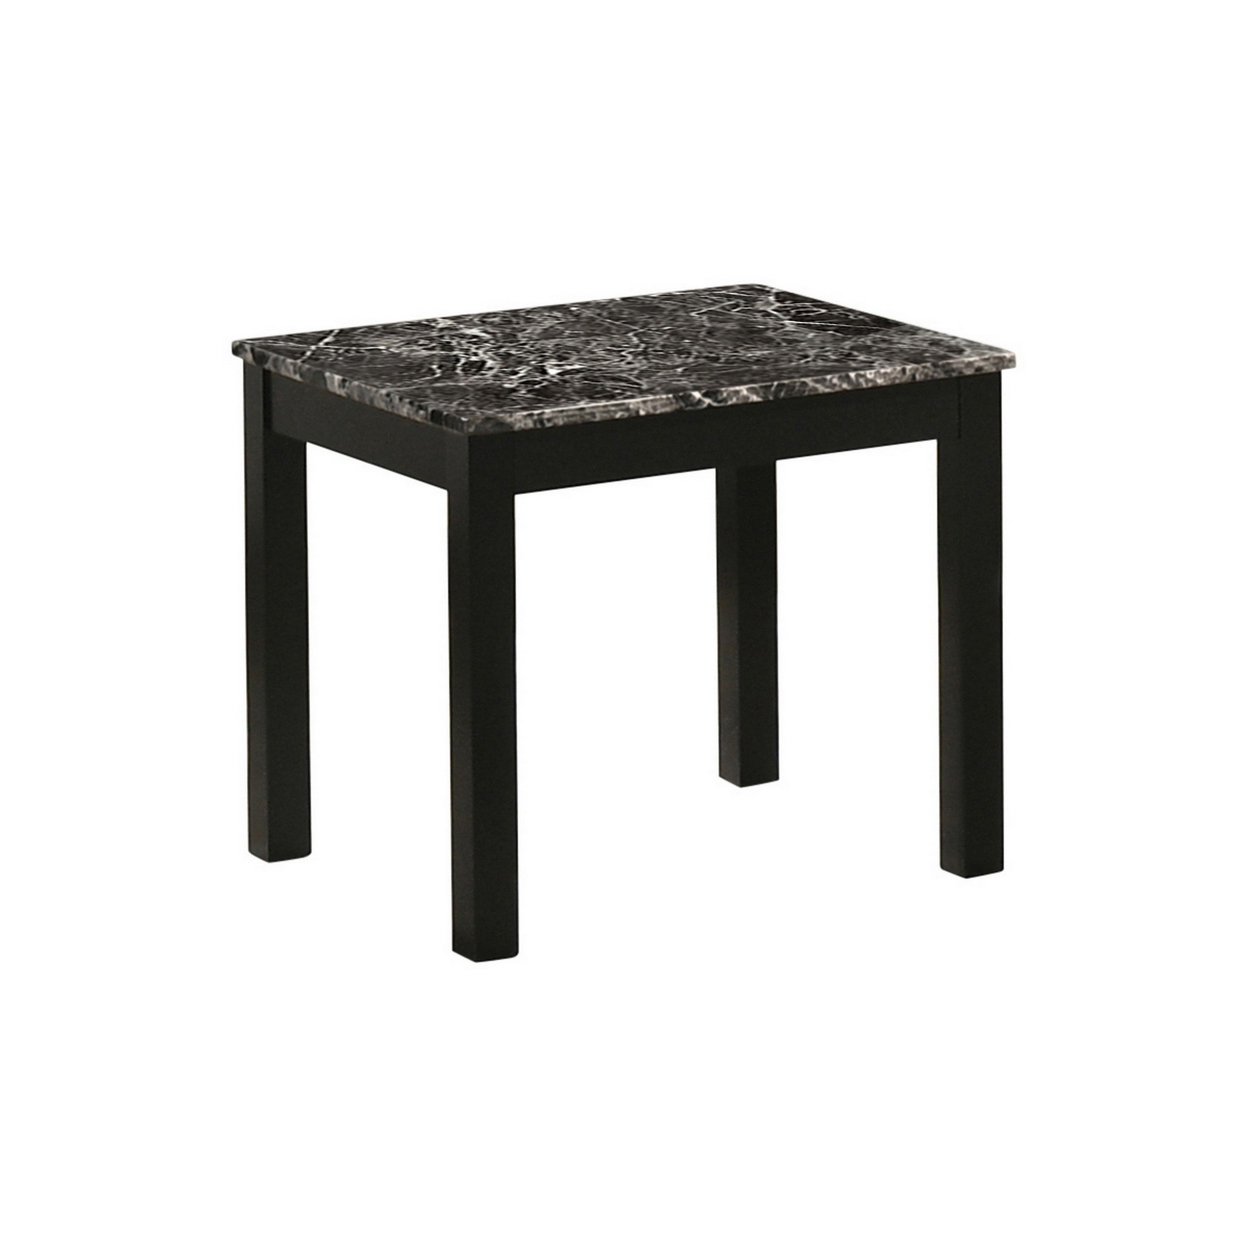 3 Piece Coffee Table And End Table Set, Faux Marble Surface, Black Motif- Saltoro Sherpi